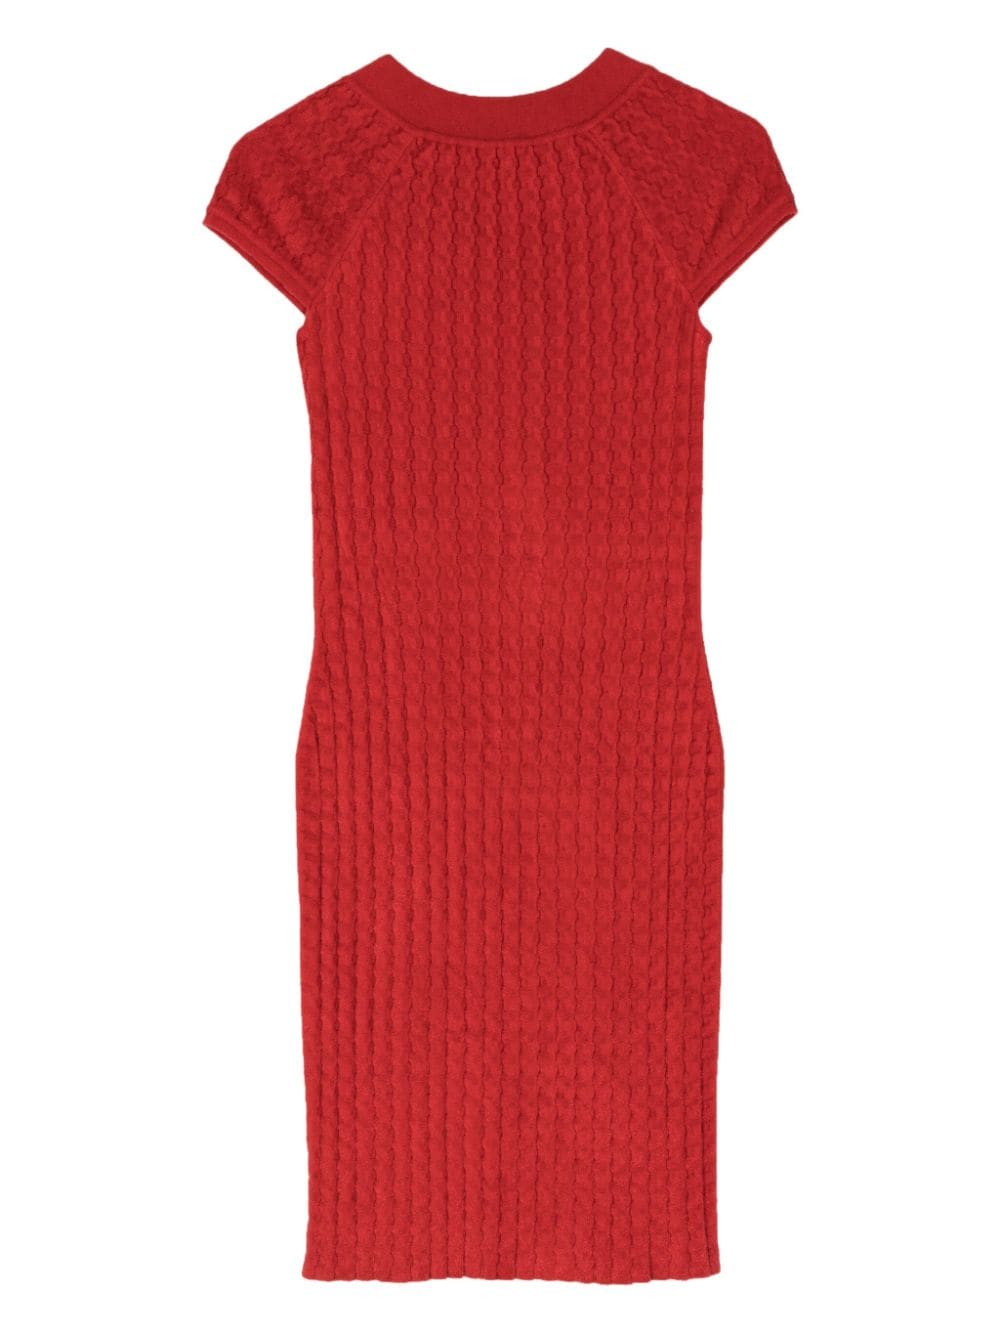 CHANEL Pre-Owned bouclé-knit midi dress - Rood